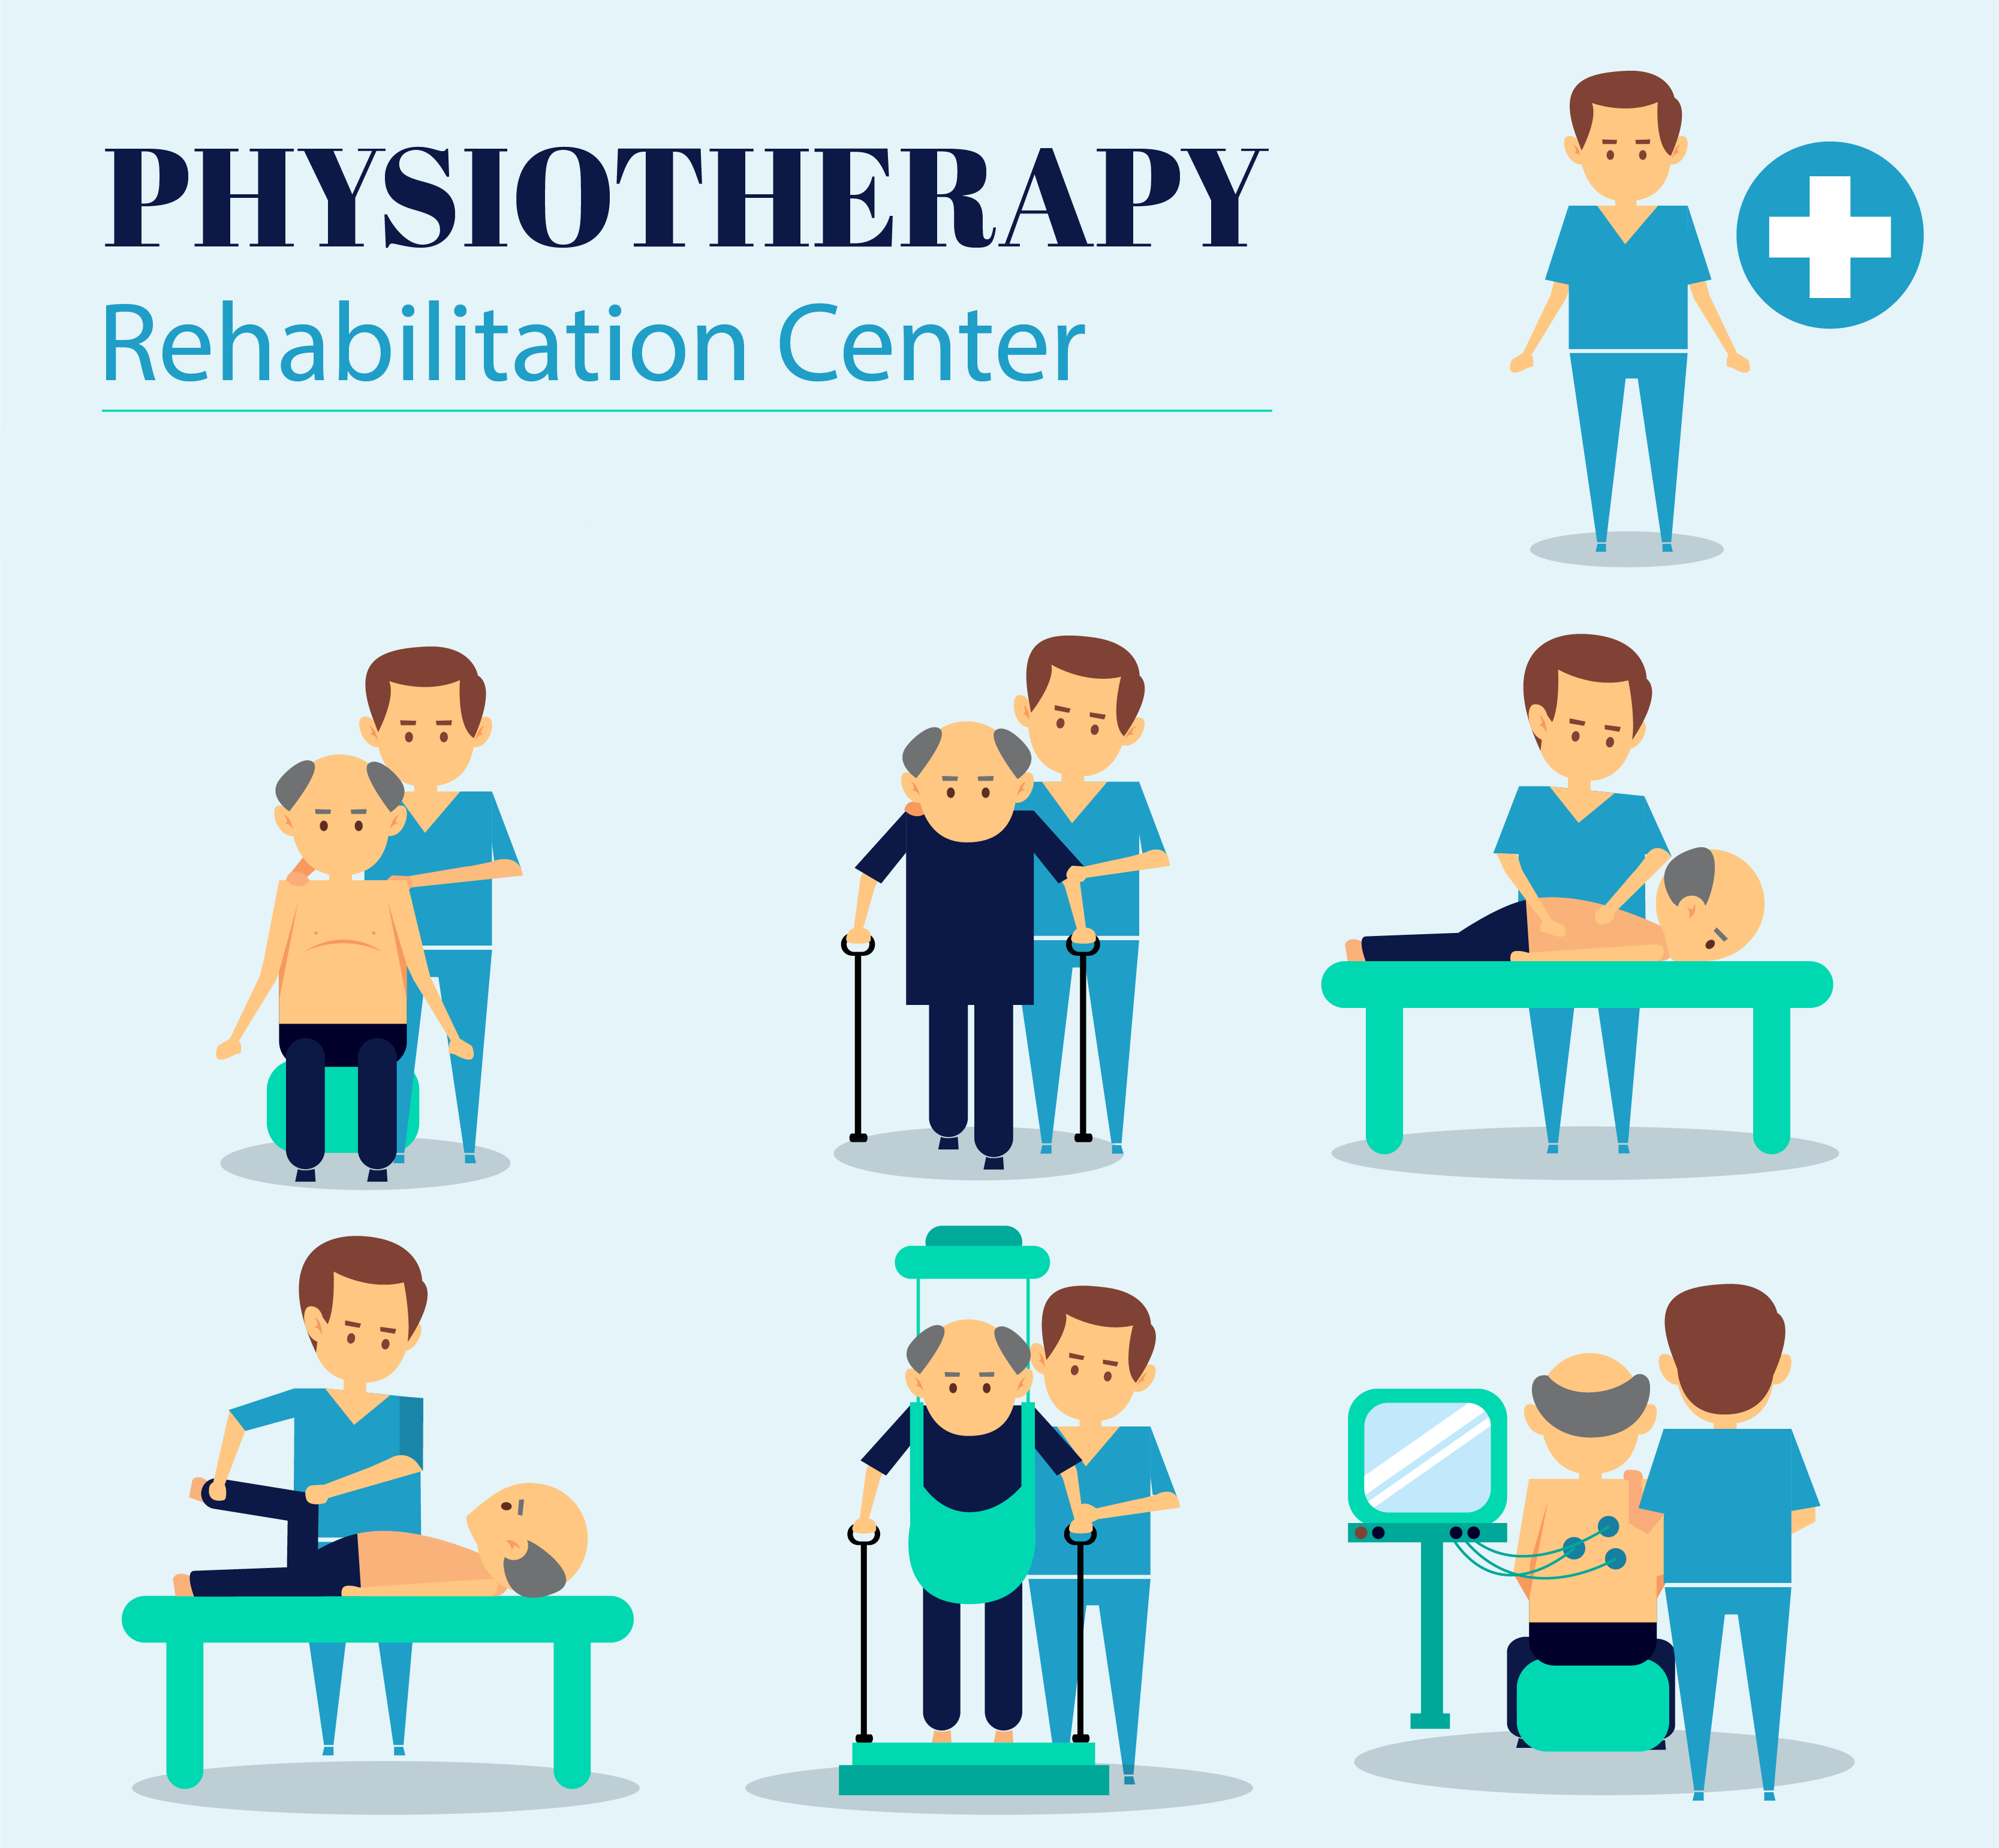 Home Physiotherapy in Jabalpur | Aastha Physiotherapy & Fitness Centre | Home Physiotherapy in Jabalpur, Home Physiotherapy in Ranjhi, Physiotherapy in Ranjhi jabalpur, best physio center in ranjhi jabalpur, physio clinic in Jabalpur, physiotherapy after surgery in Jbp - GL106865